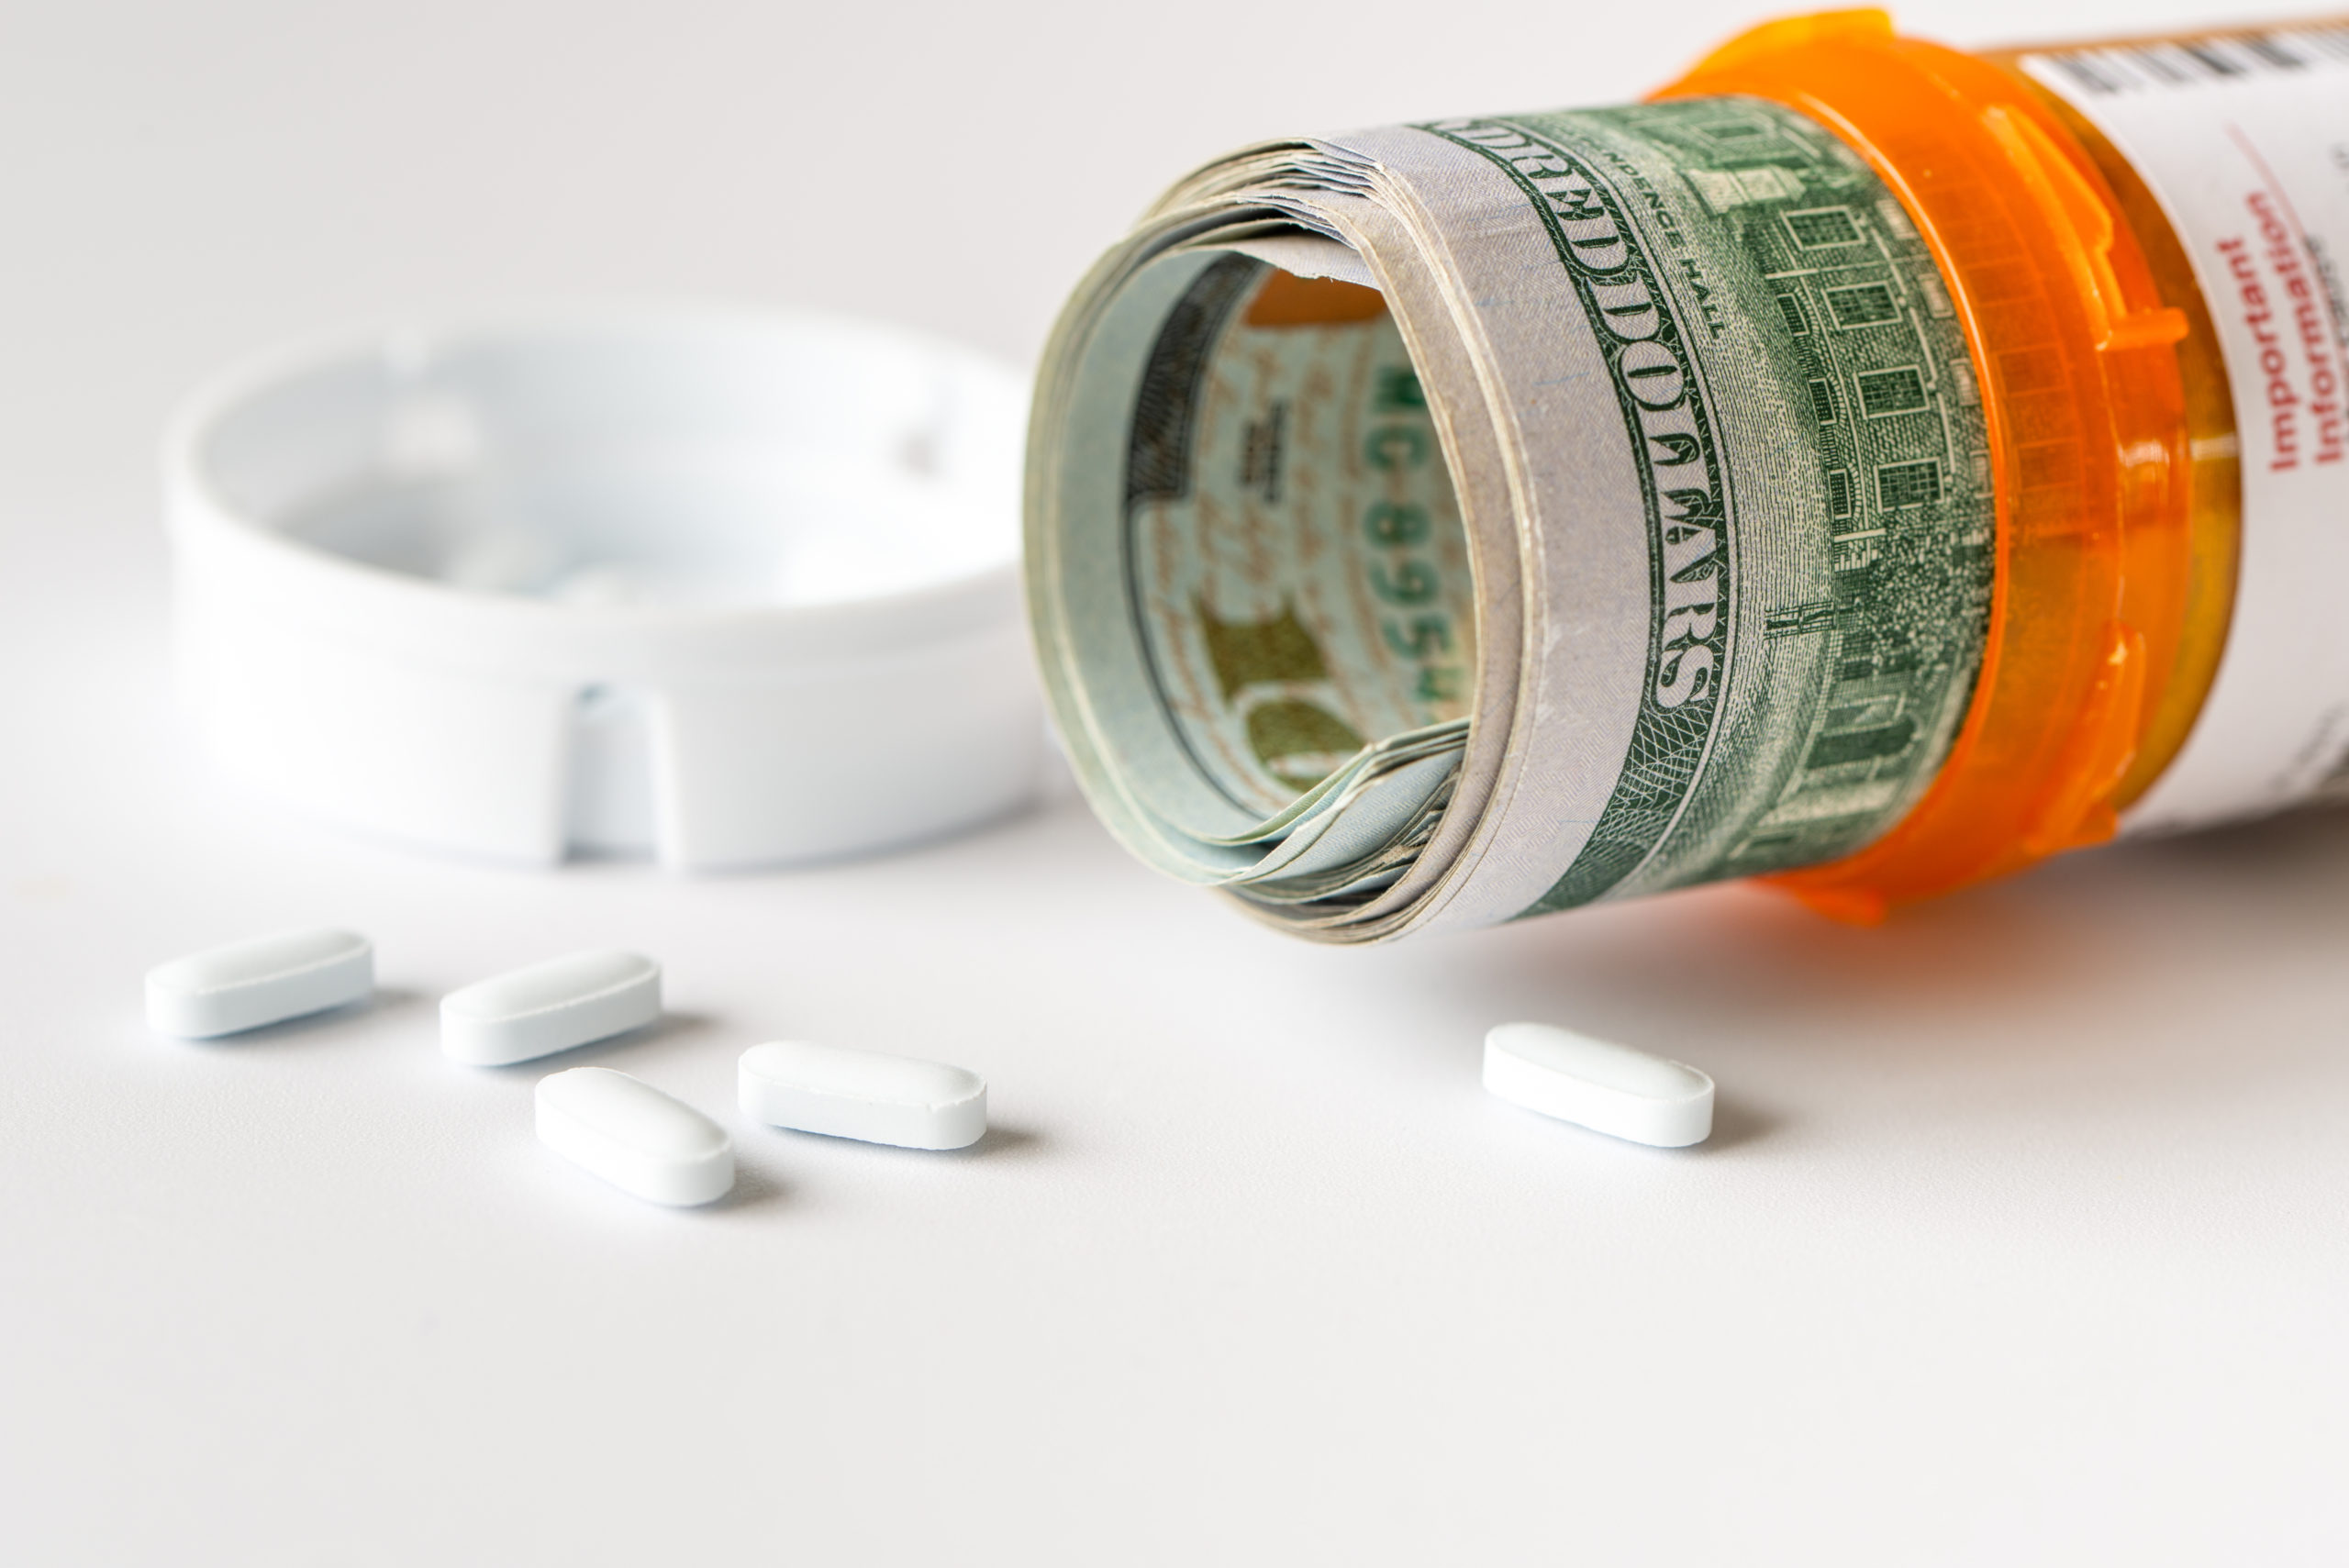 Opioid and Pharmacy Fraud Cases using US Dollars with white medicine pills spilling from bottle